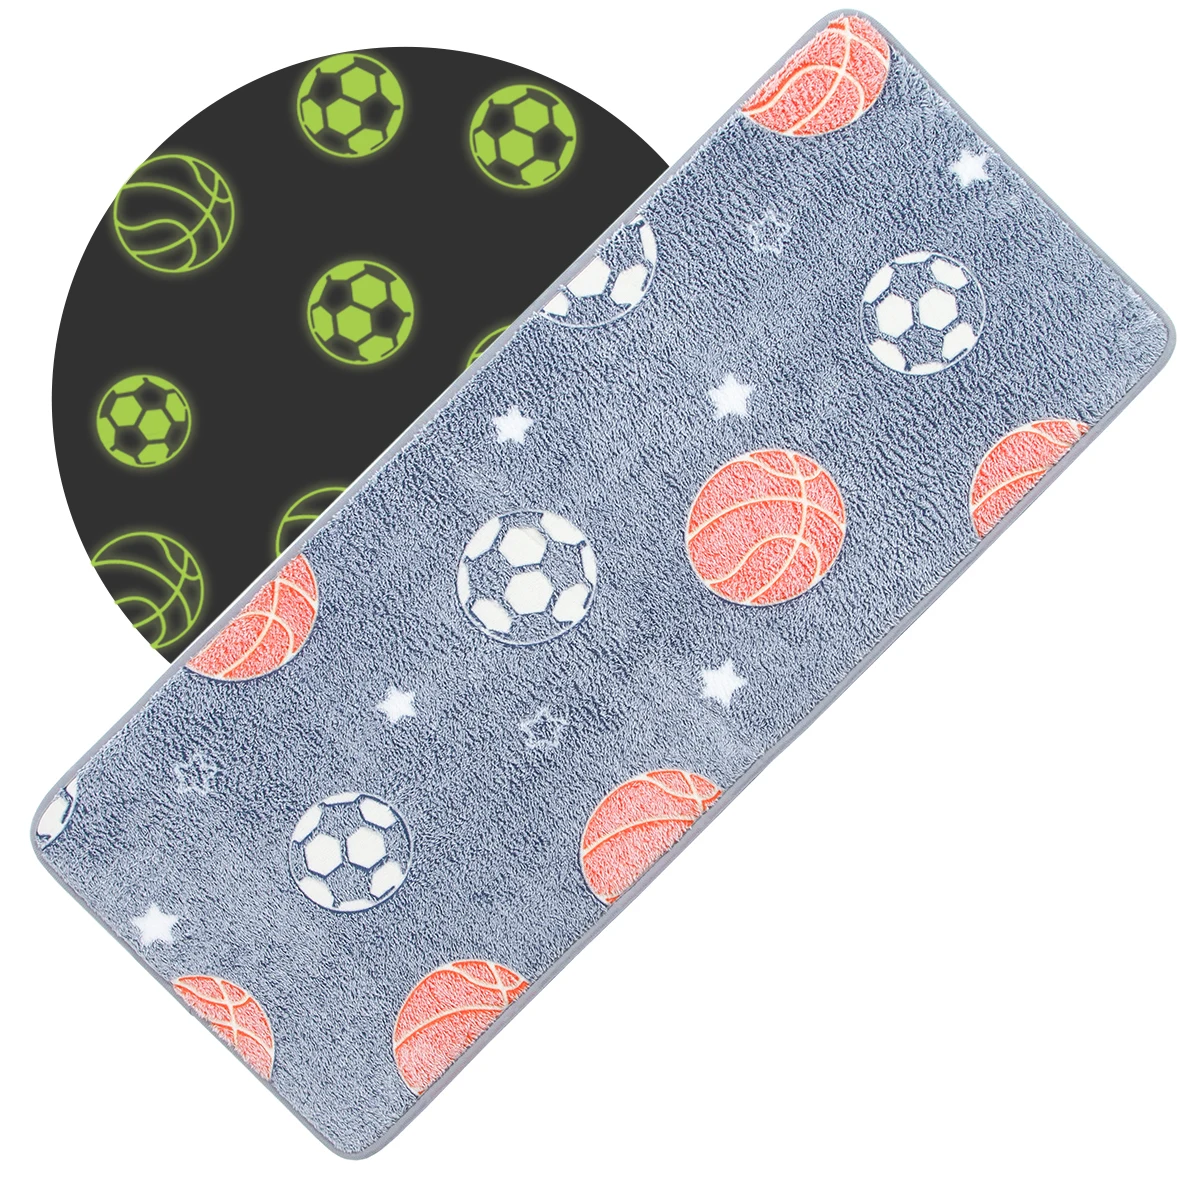 

RTS glow in the dark Flannel fabric football Kids mat safe and non-toxic bedroom floor mat backing PVC non-slip sponge bath mat, Please select an existing color